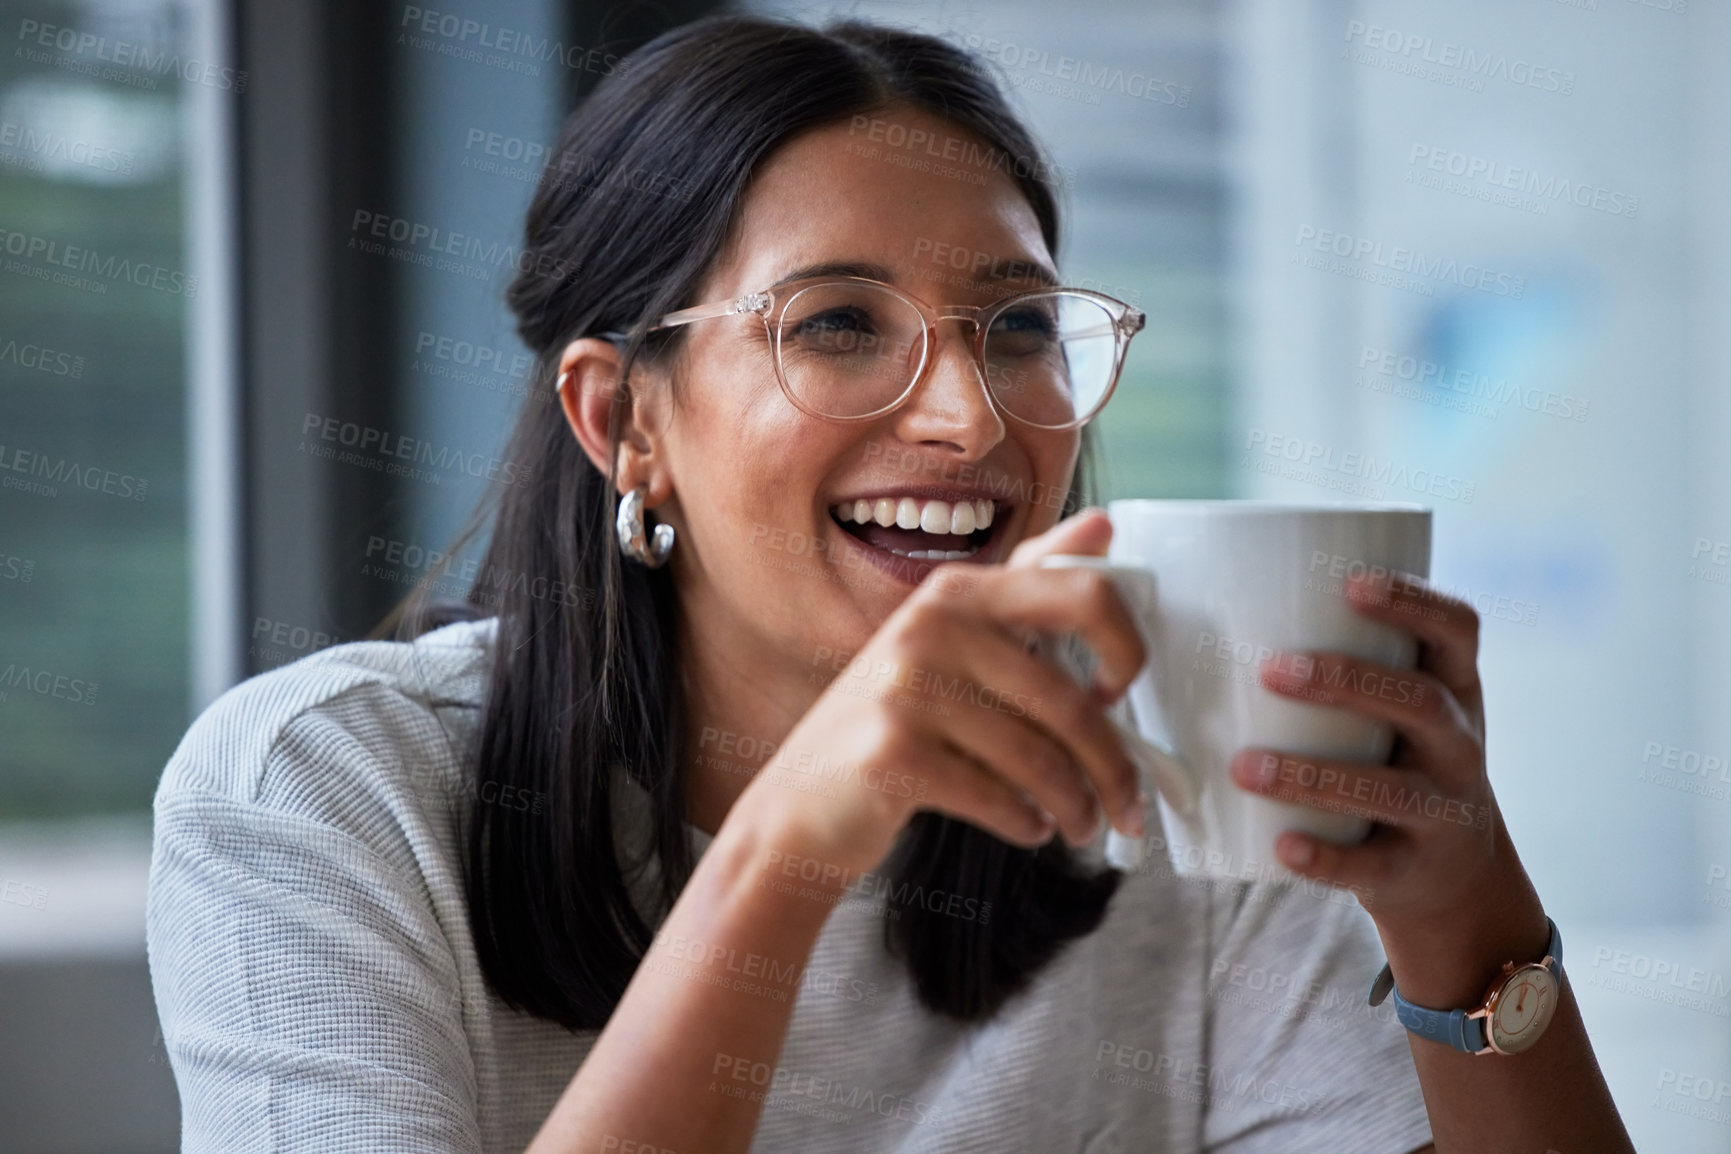 Buy stock photo Shot of a young woman having coffee in a modern office